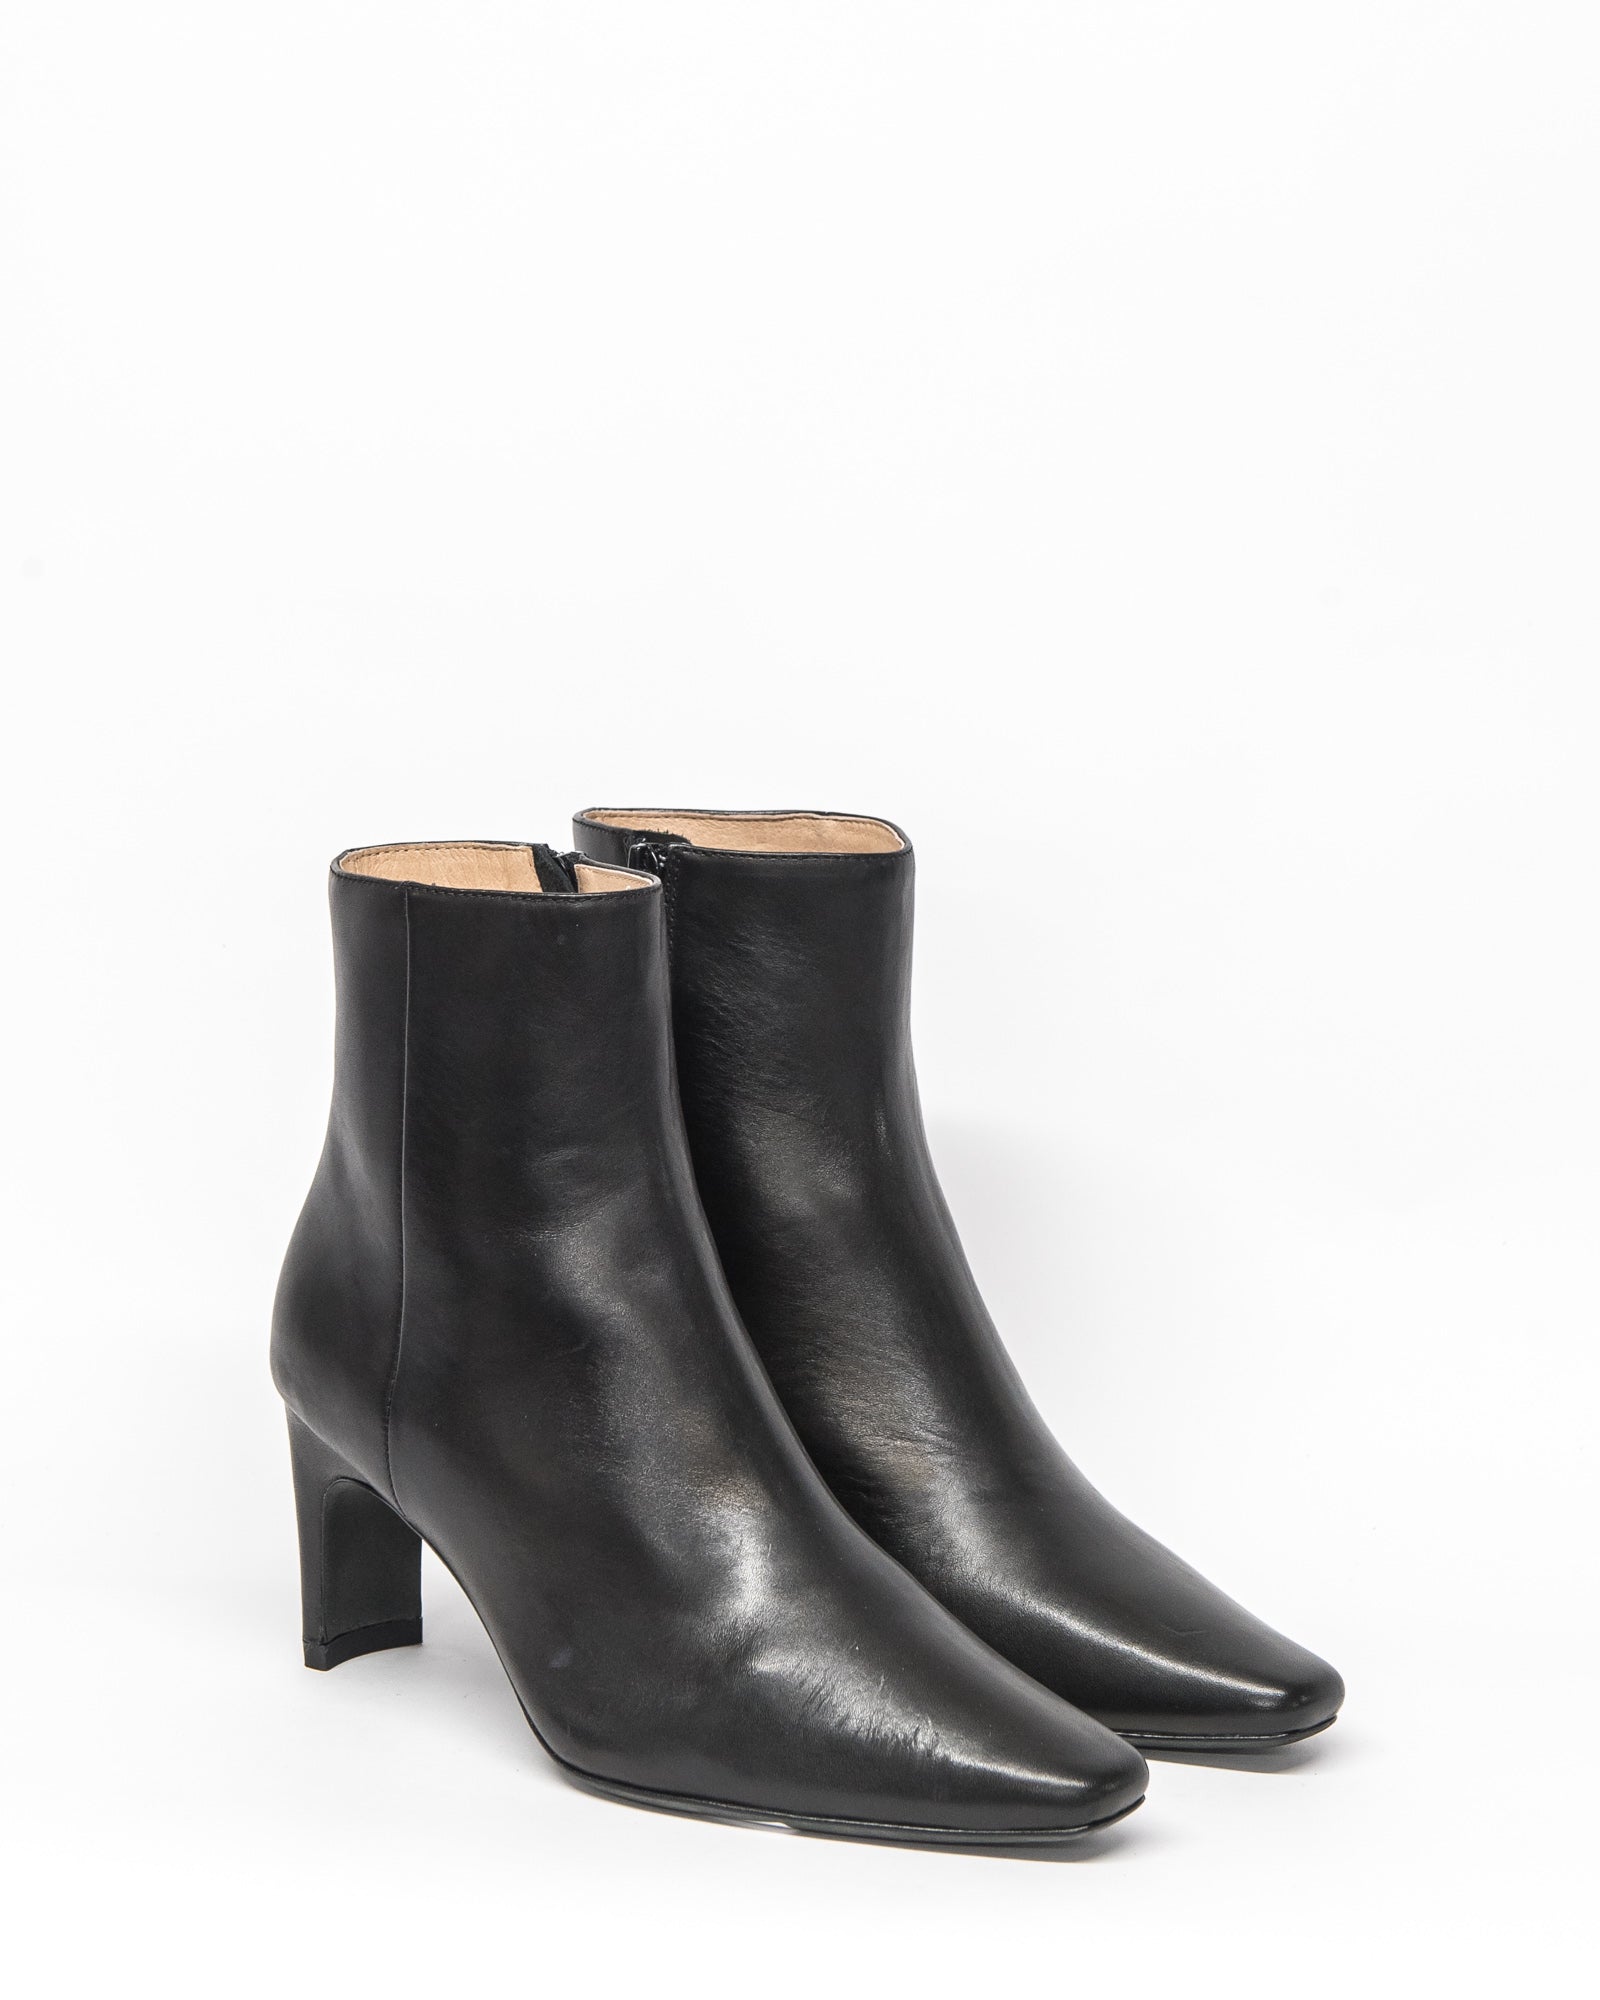 rouge boot - black leather